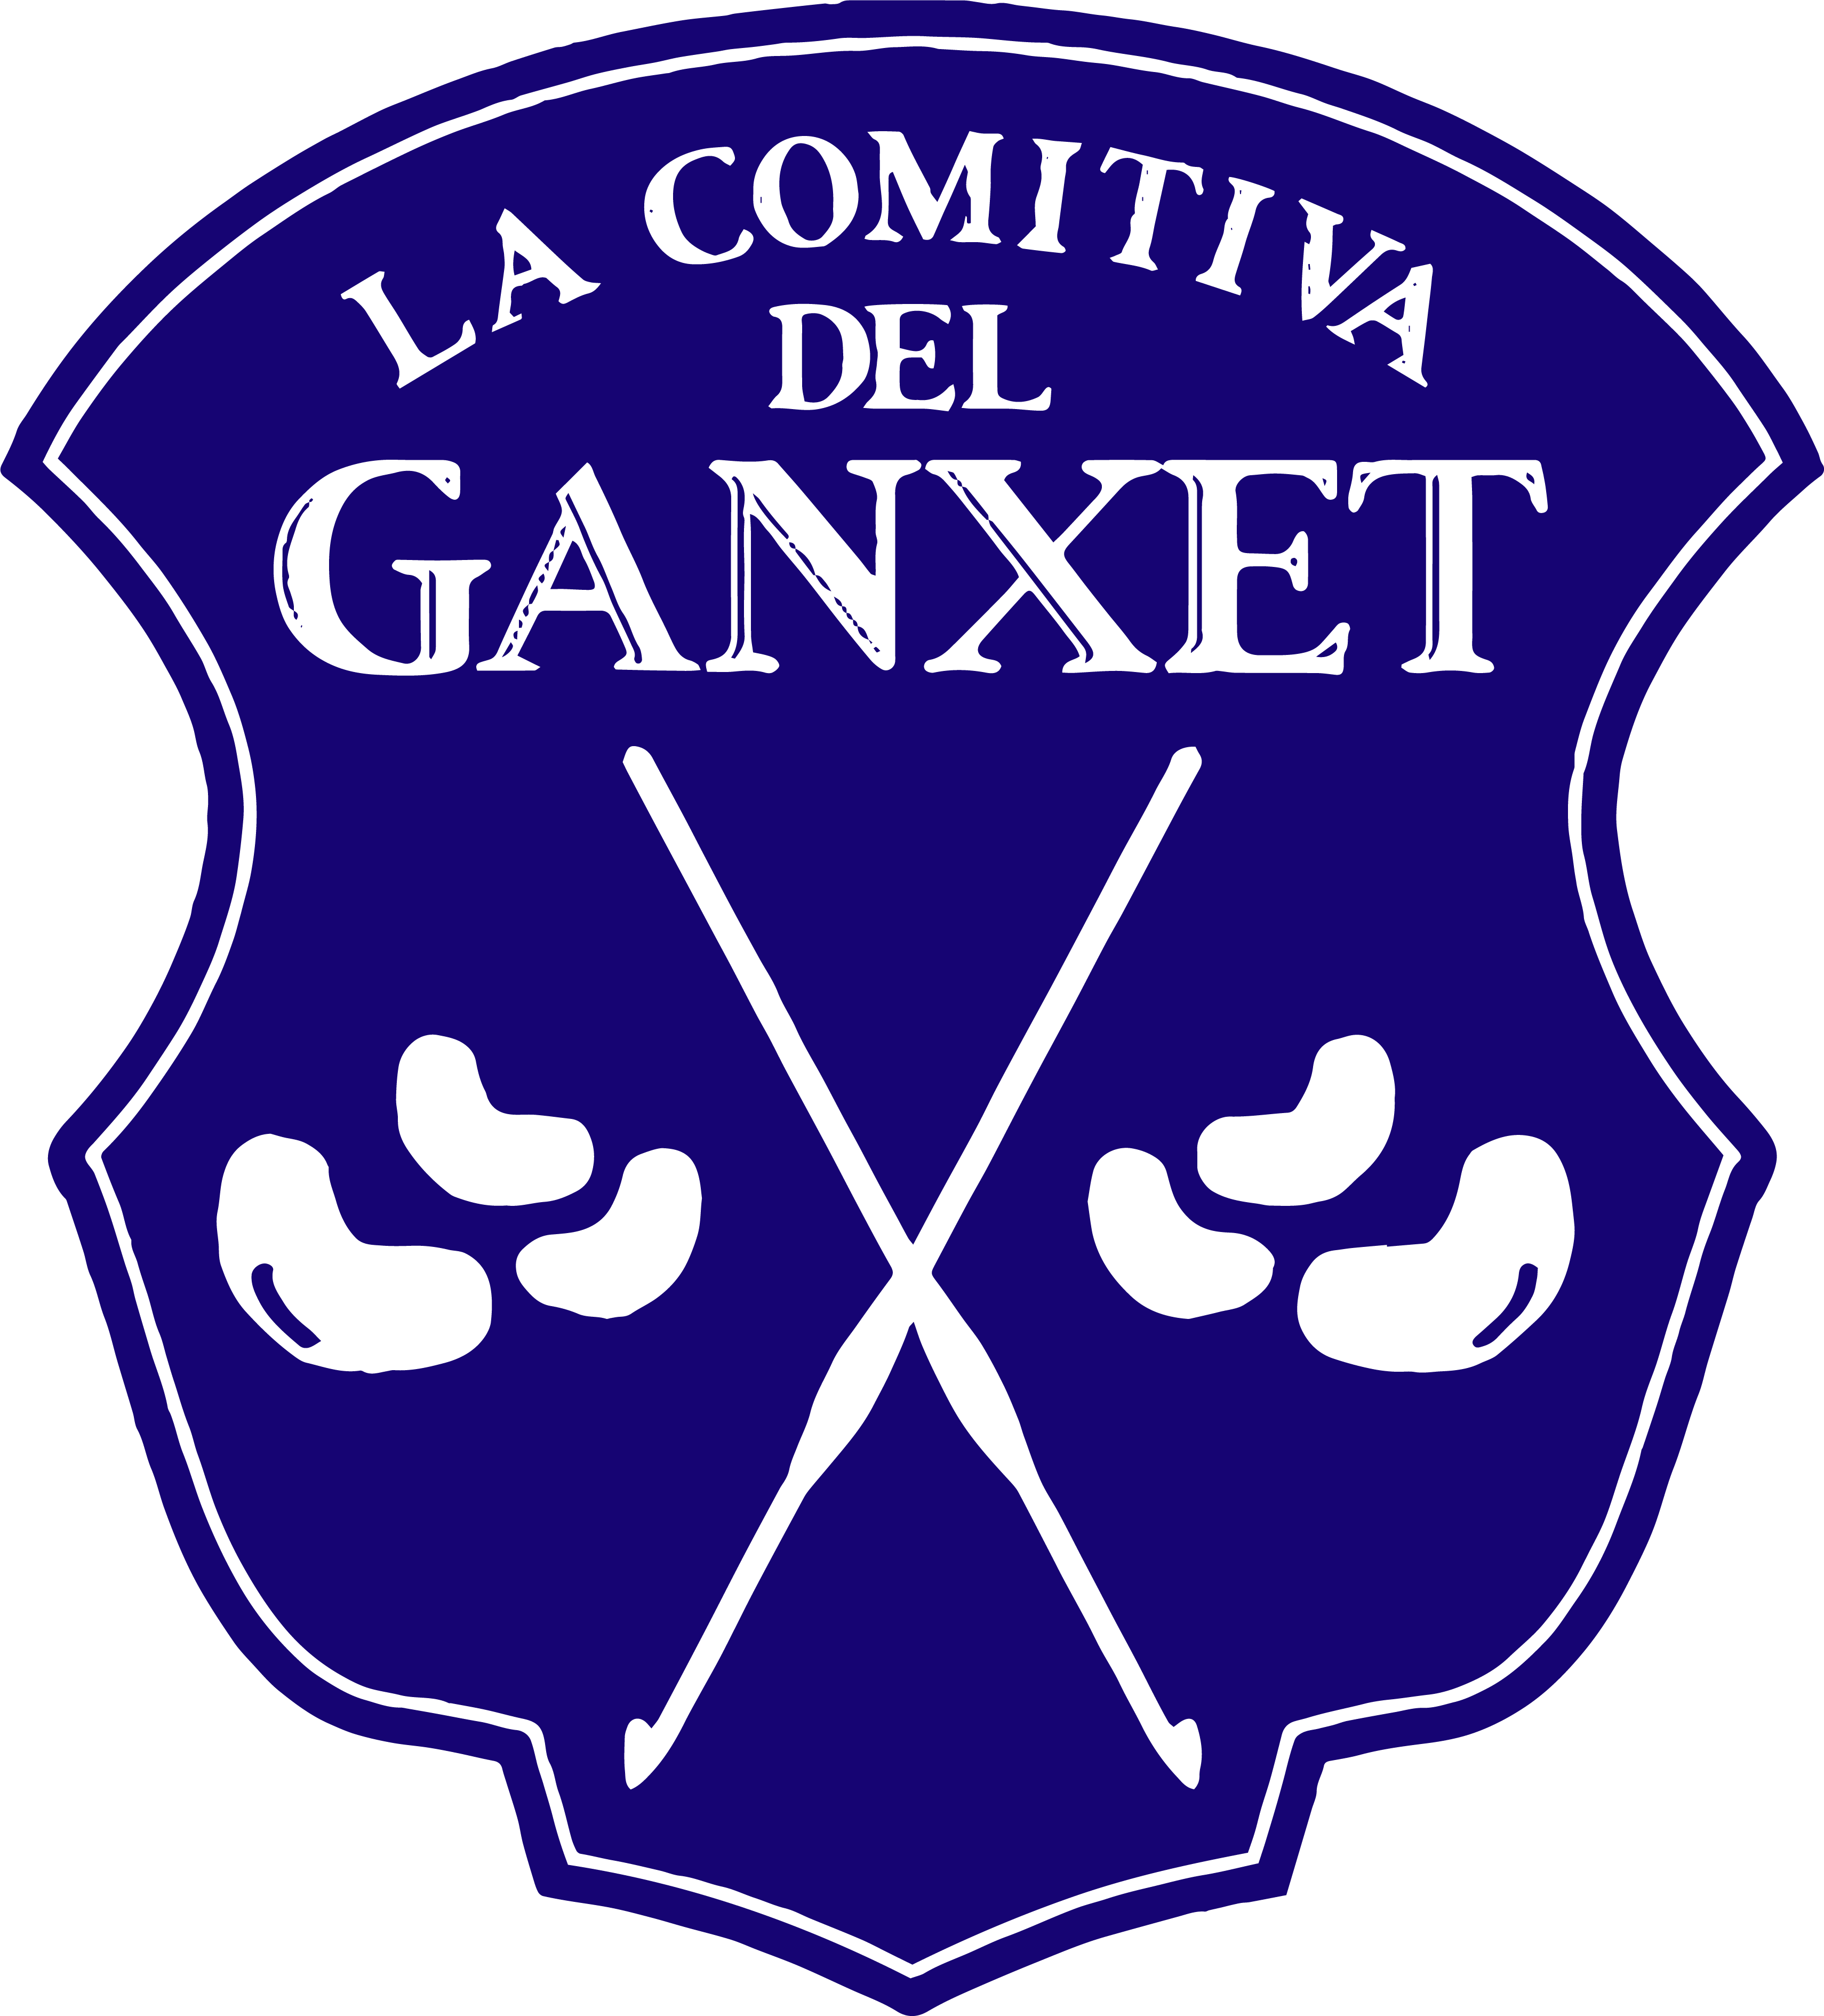 You are currently viewing Comitiva del ganxet